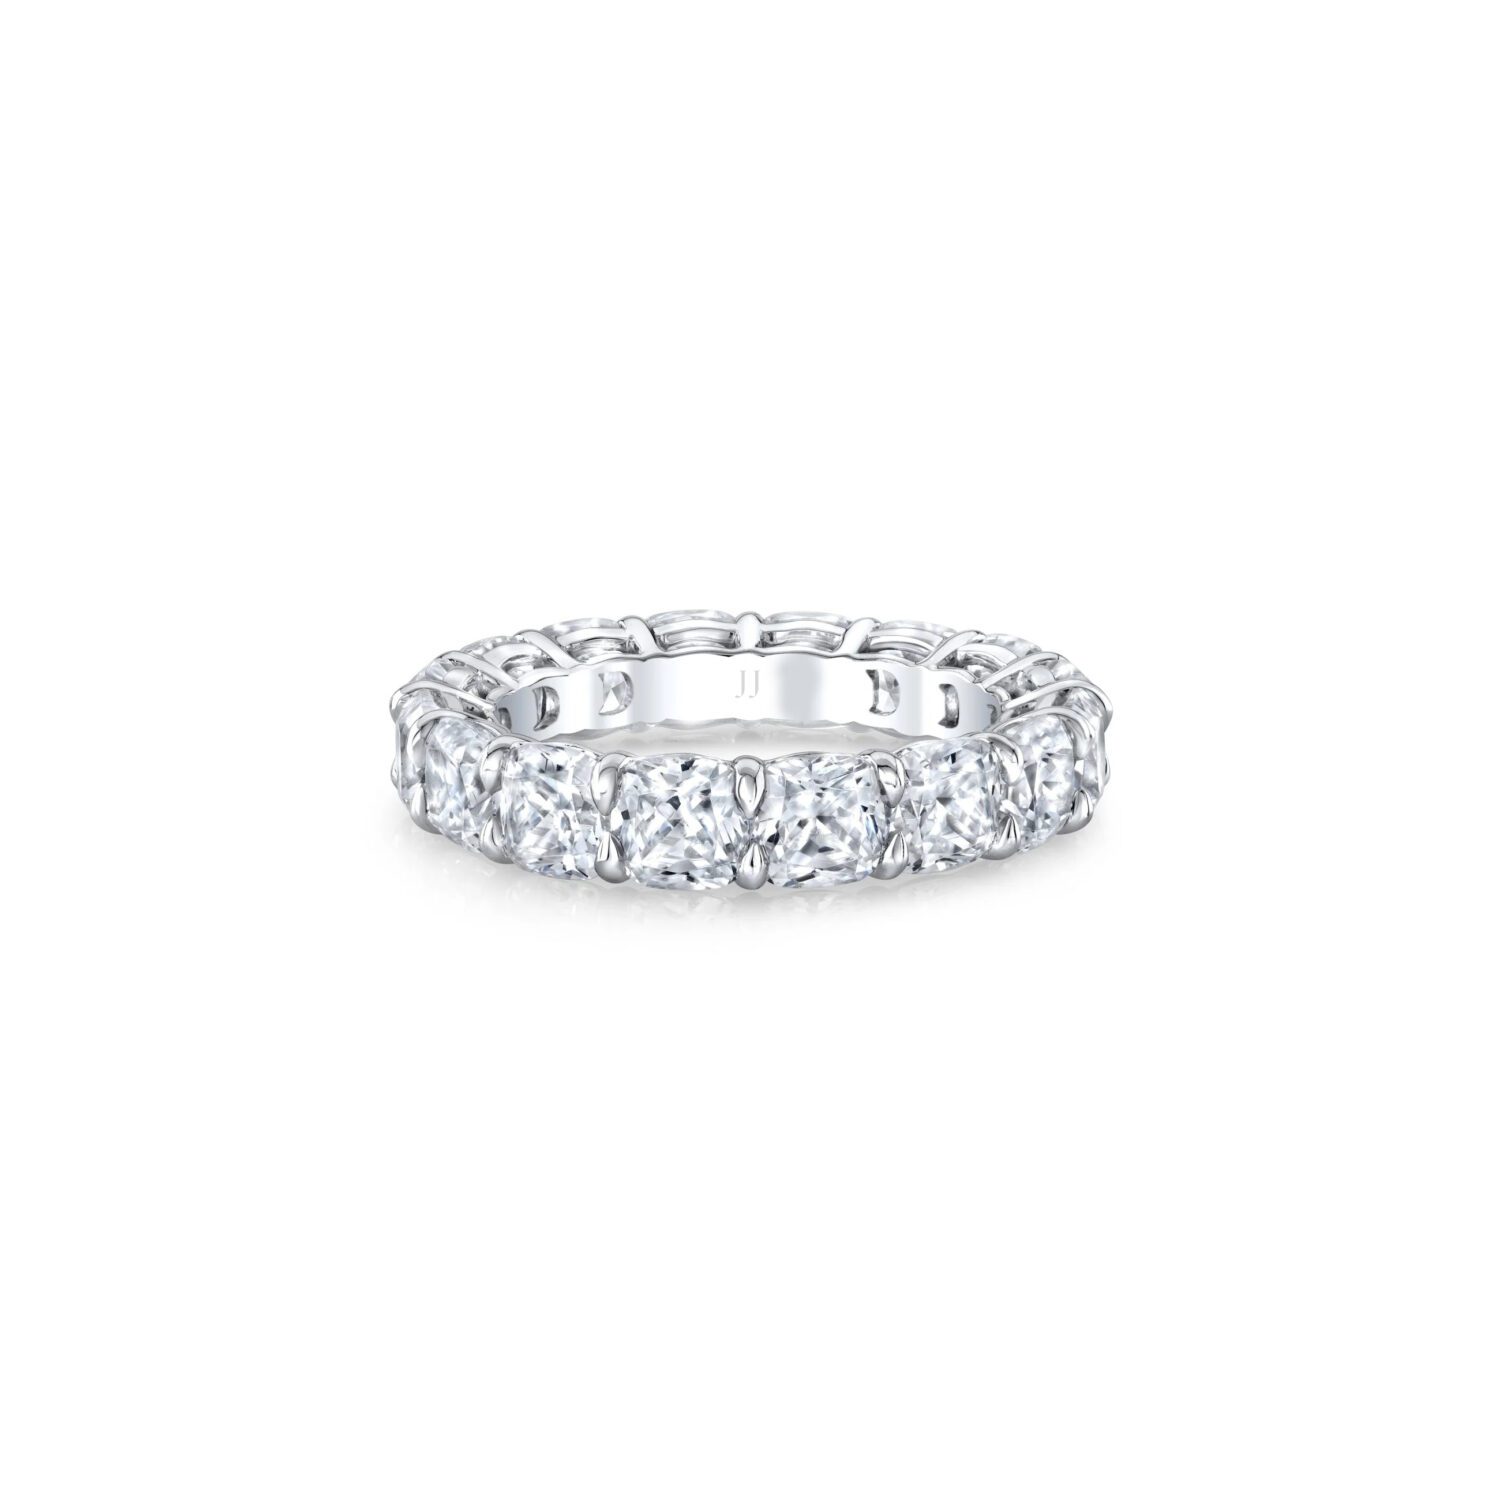 Lab grown diamonds in Cyprus - The Classy Cushion Cut 2.5 ct to 12 ct Full Eternity Band Diamond Ring best quality and price